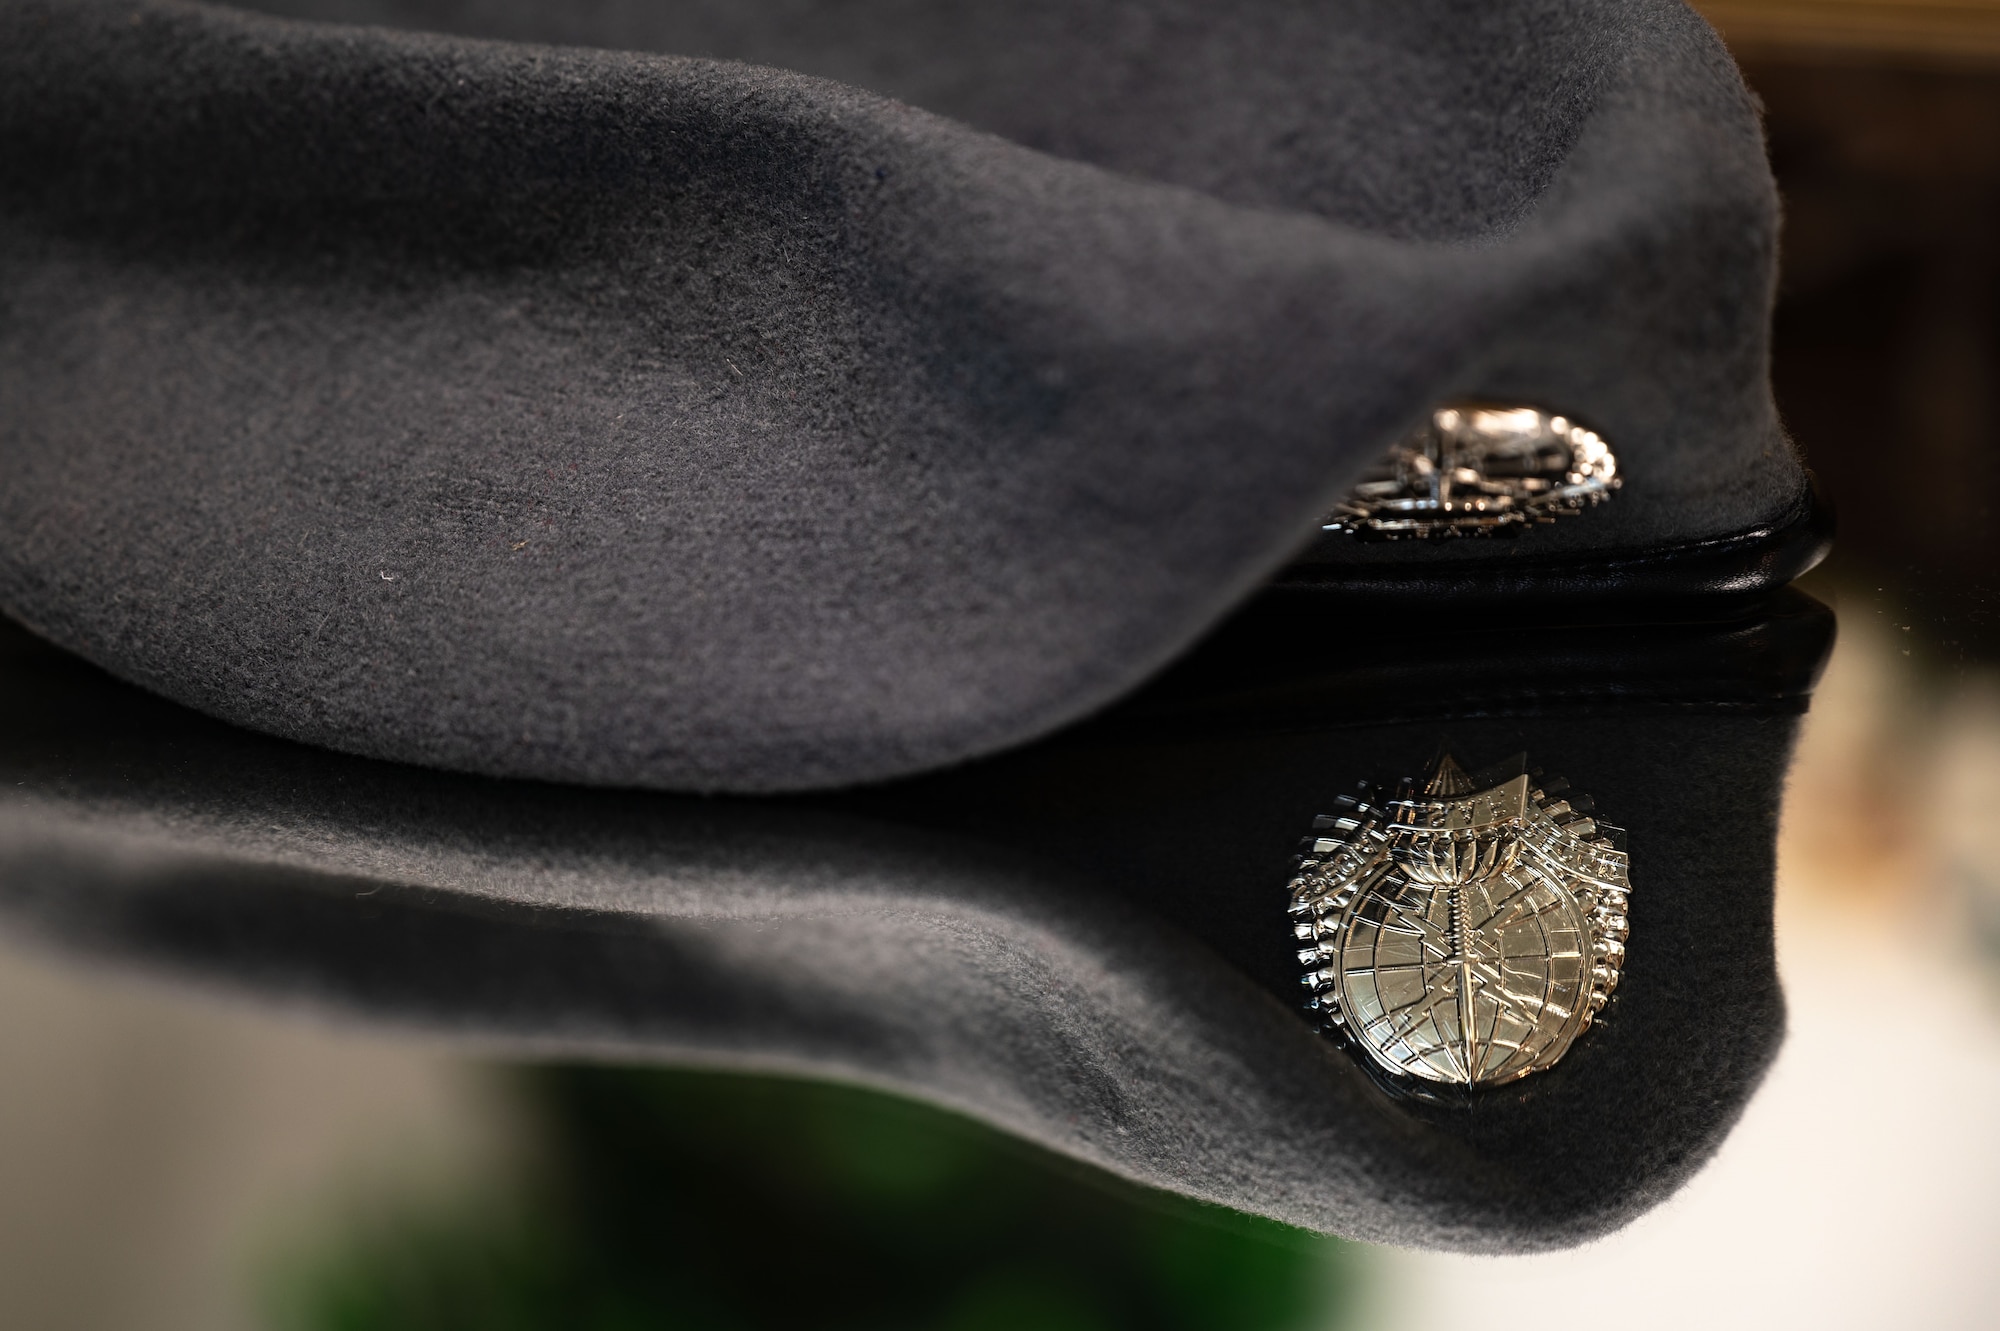 grey SR beret reflecting on a mirror with the SR emblem brightly lit